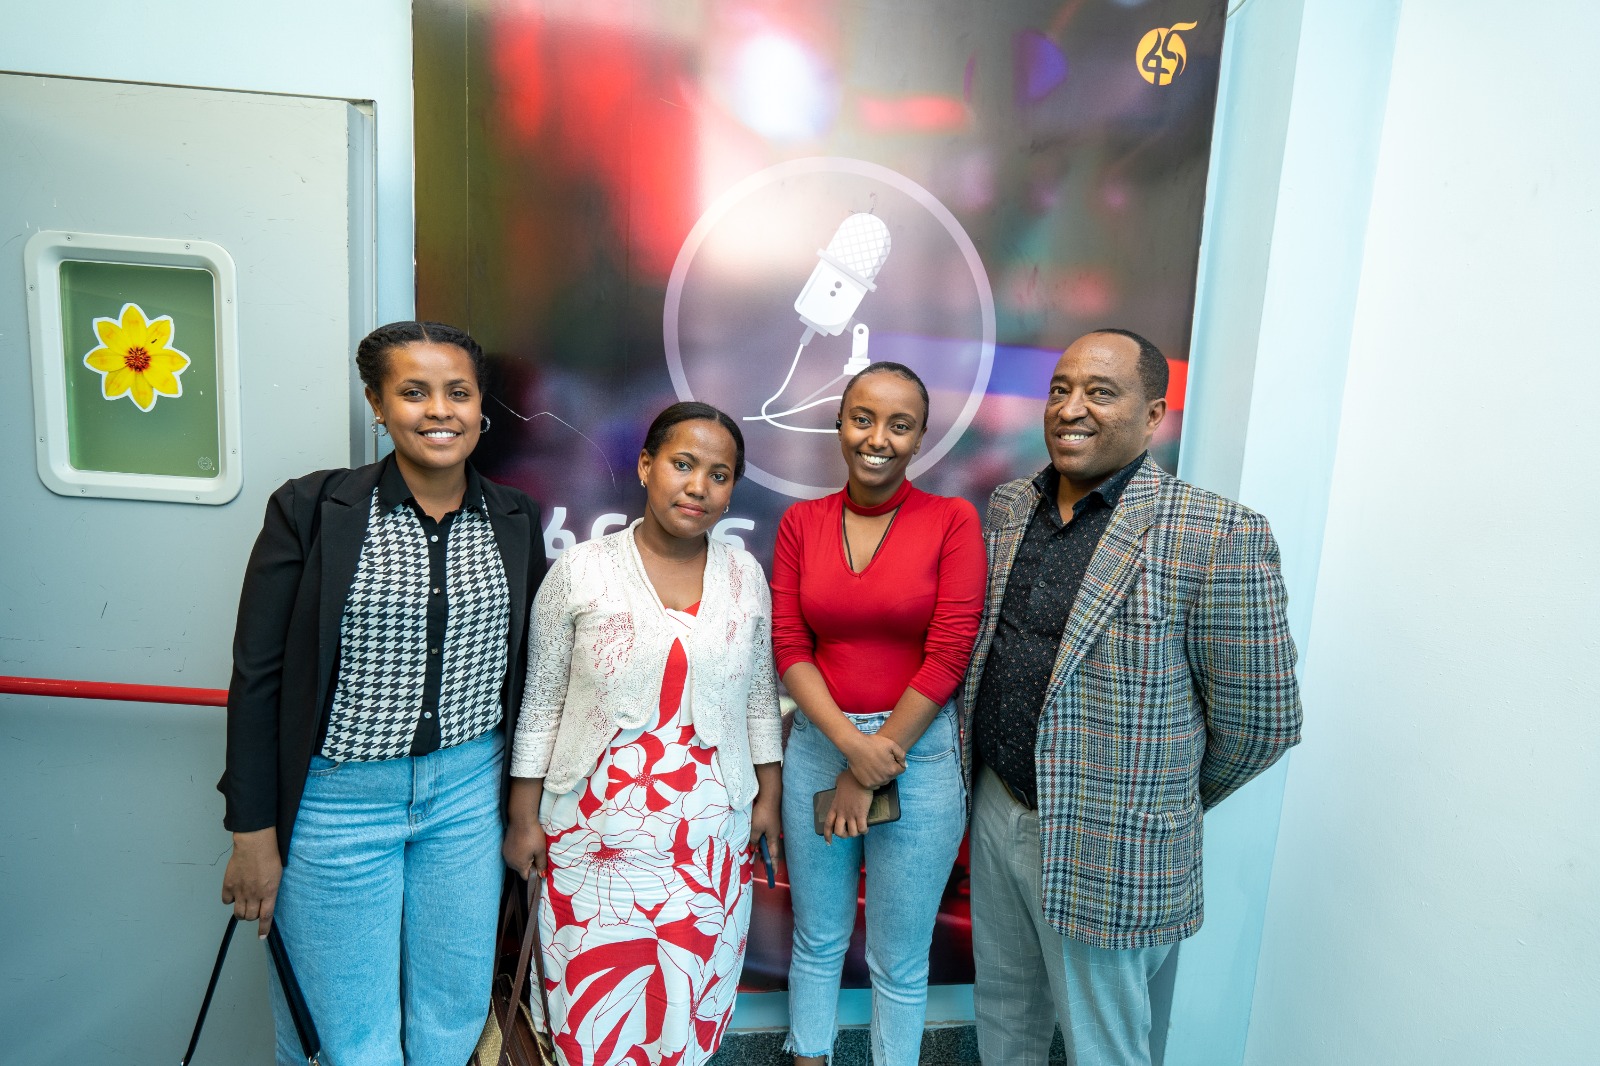 Improving Foundational Literacy: EdTech Mondays Tackles Learning Gap in Ethiopia